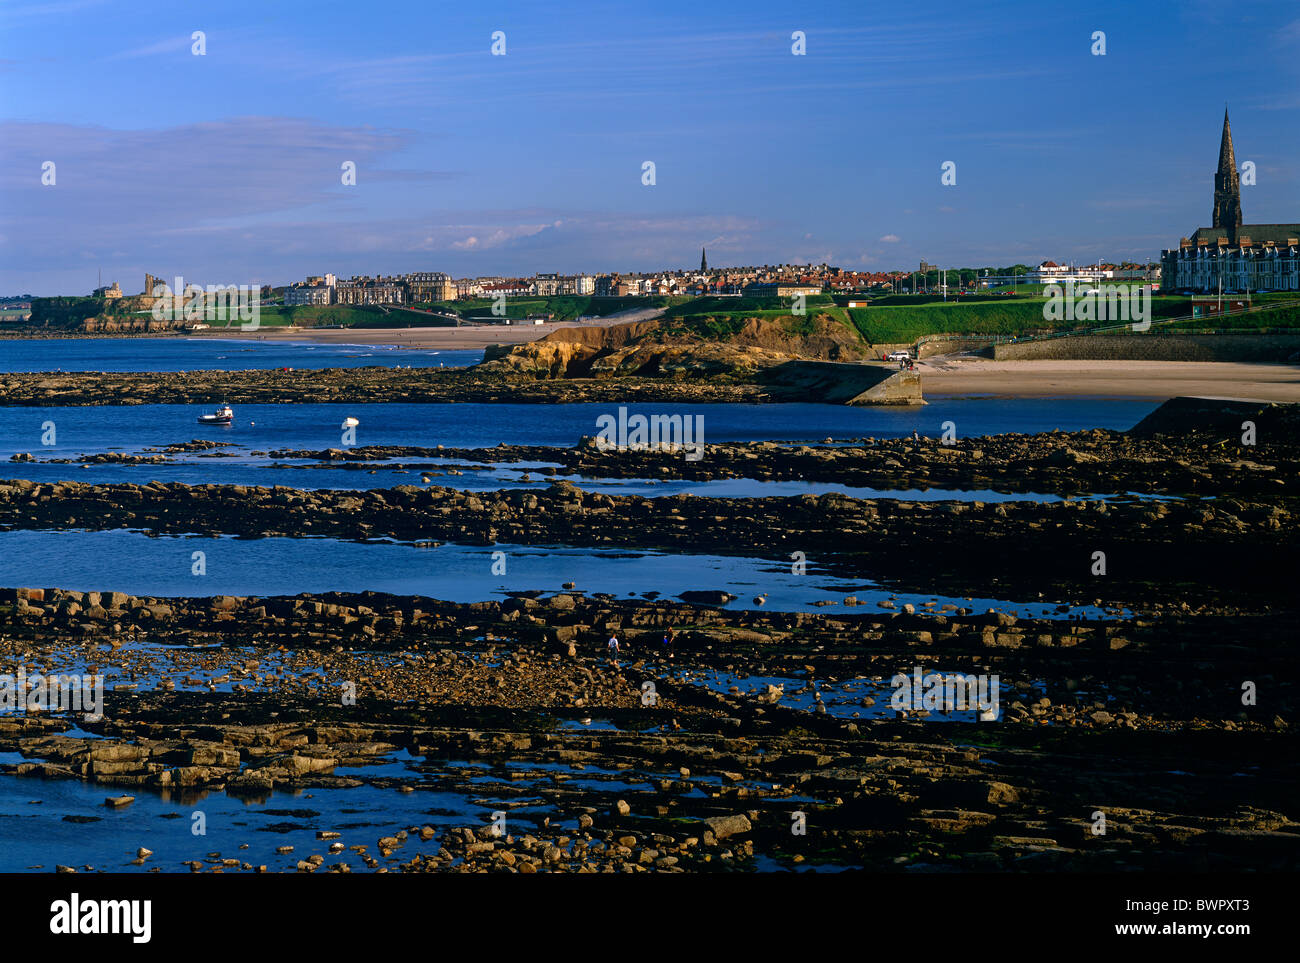 Low tide at Cullercoats and Tynemouth, Tyne and Wear, England Stock Photo